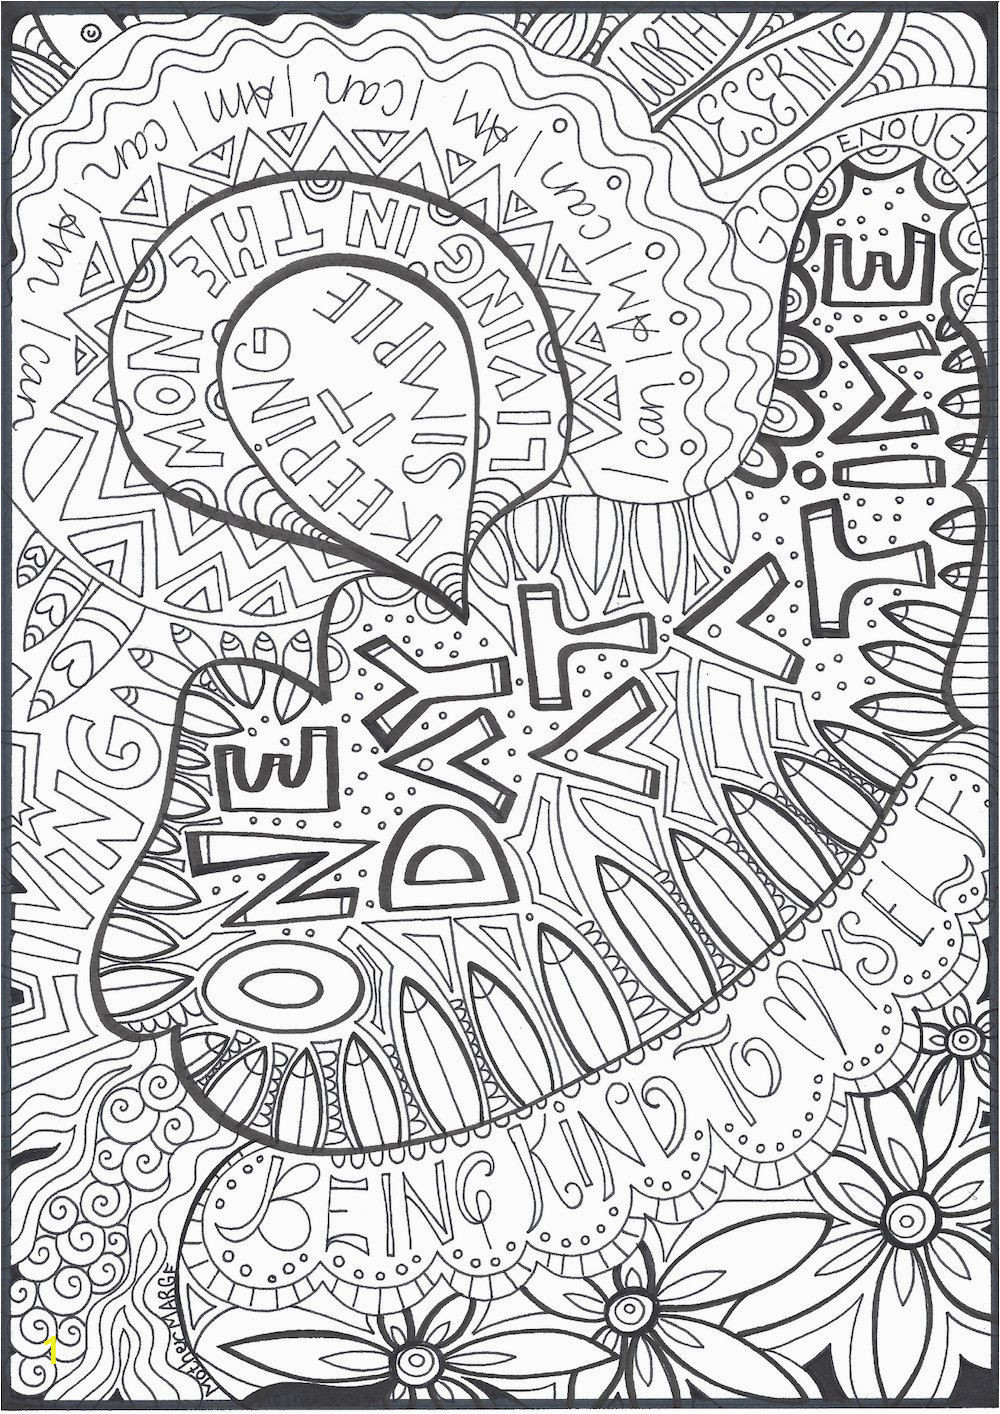 Coloring Pages Quotes for Adults E Day at A Time Coloring Page Adult by